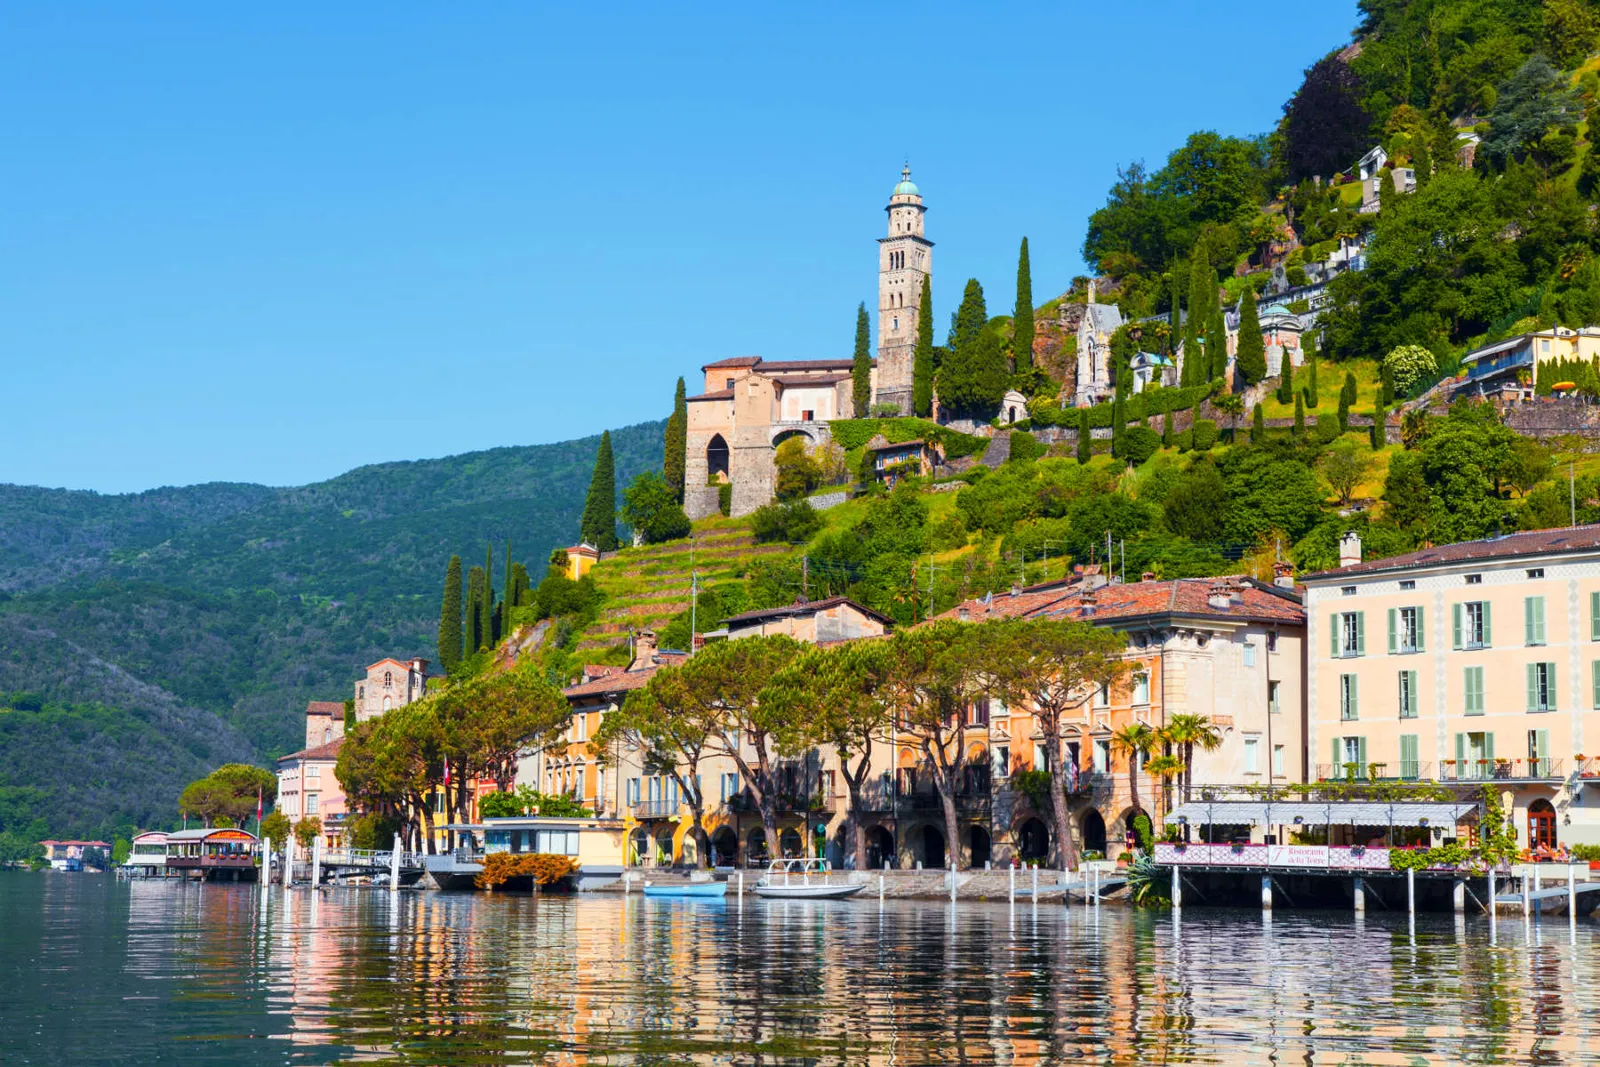 Italy and Switzerland in one day: Lake Como, Bellagio and Lugano from Milan